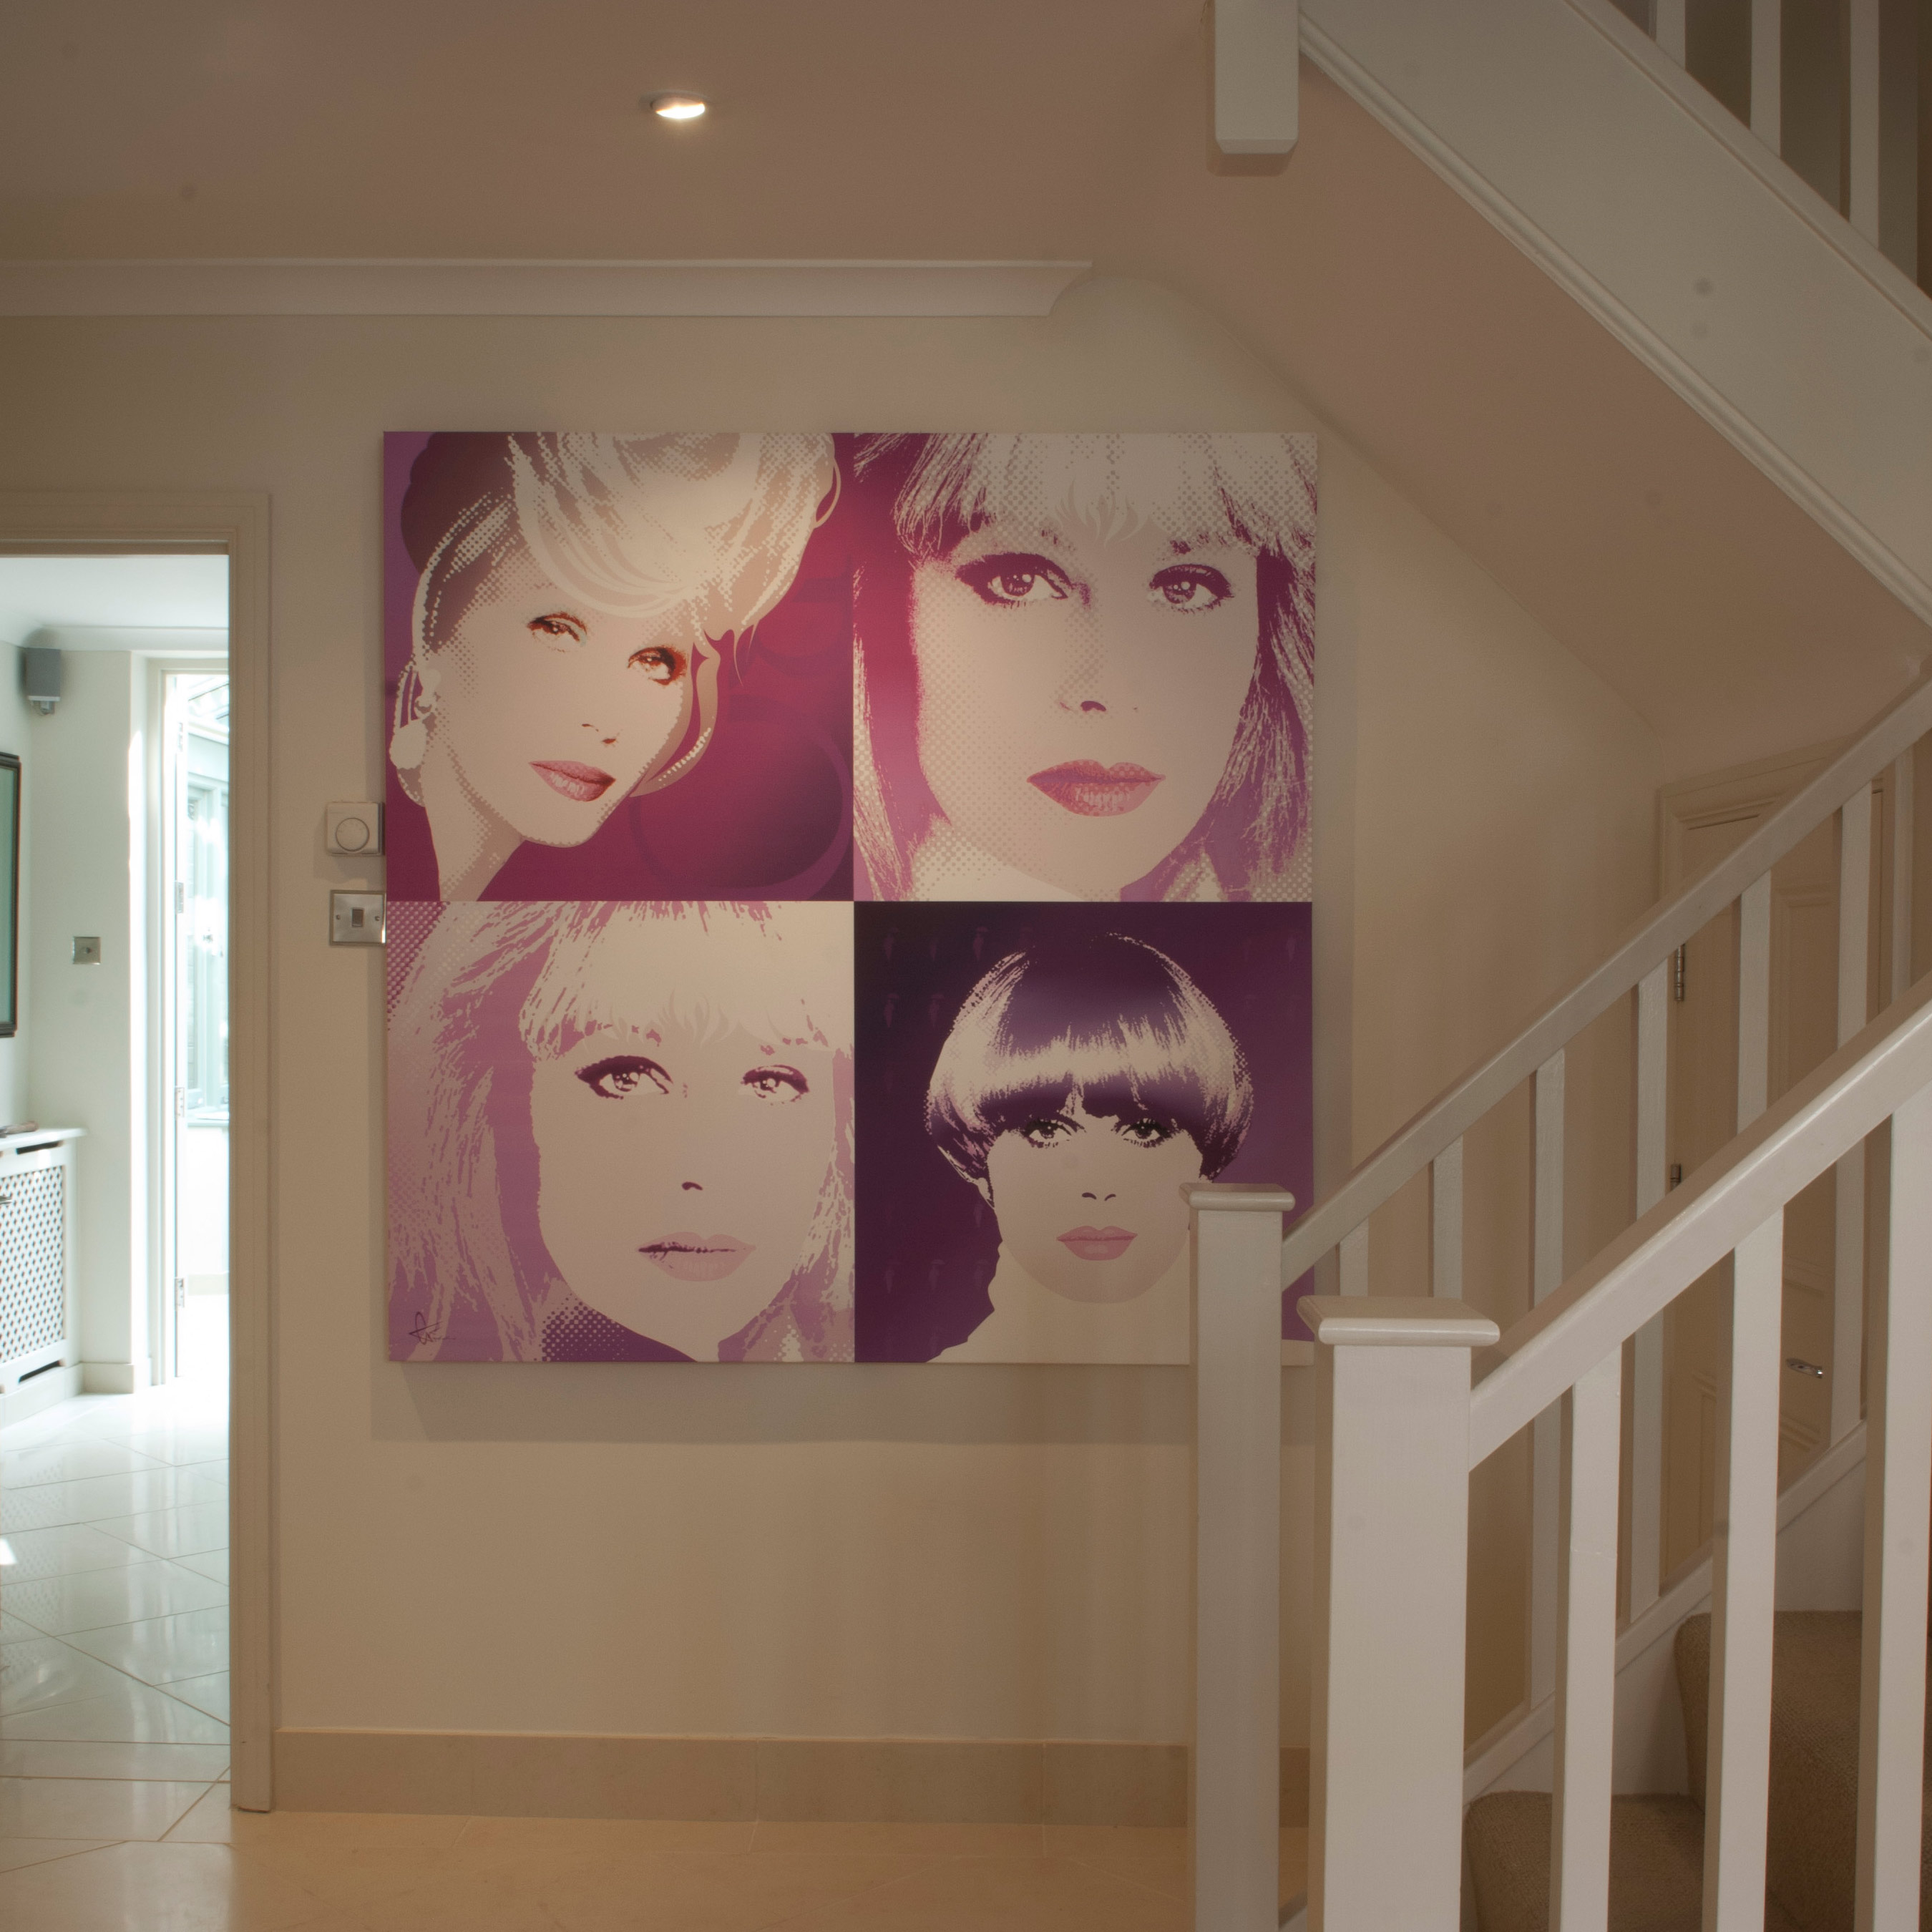 Portrait of Joanna Lumley, and some of her favorite characters